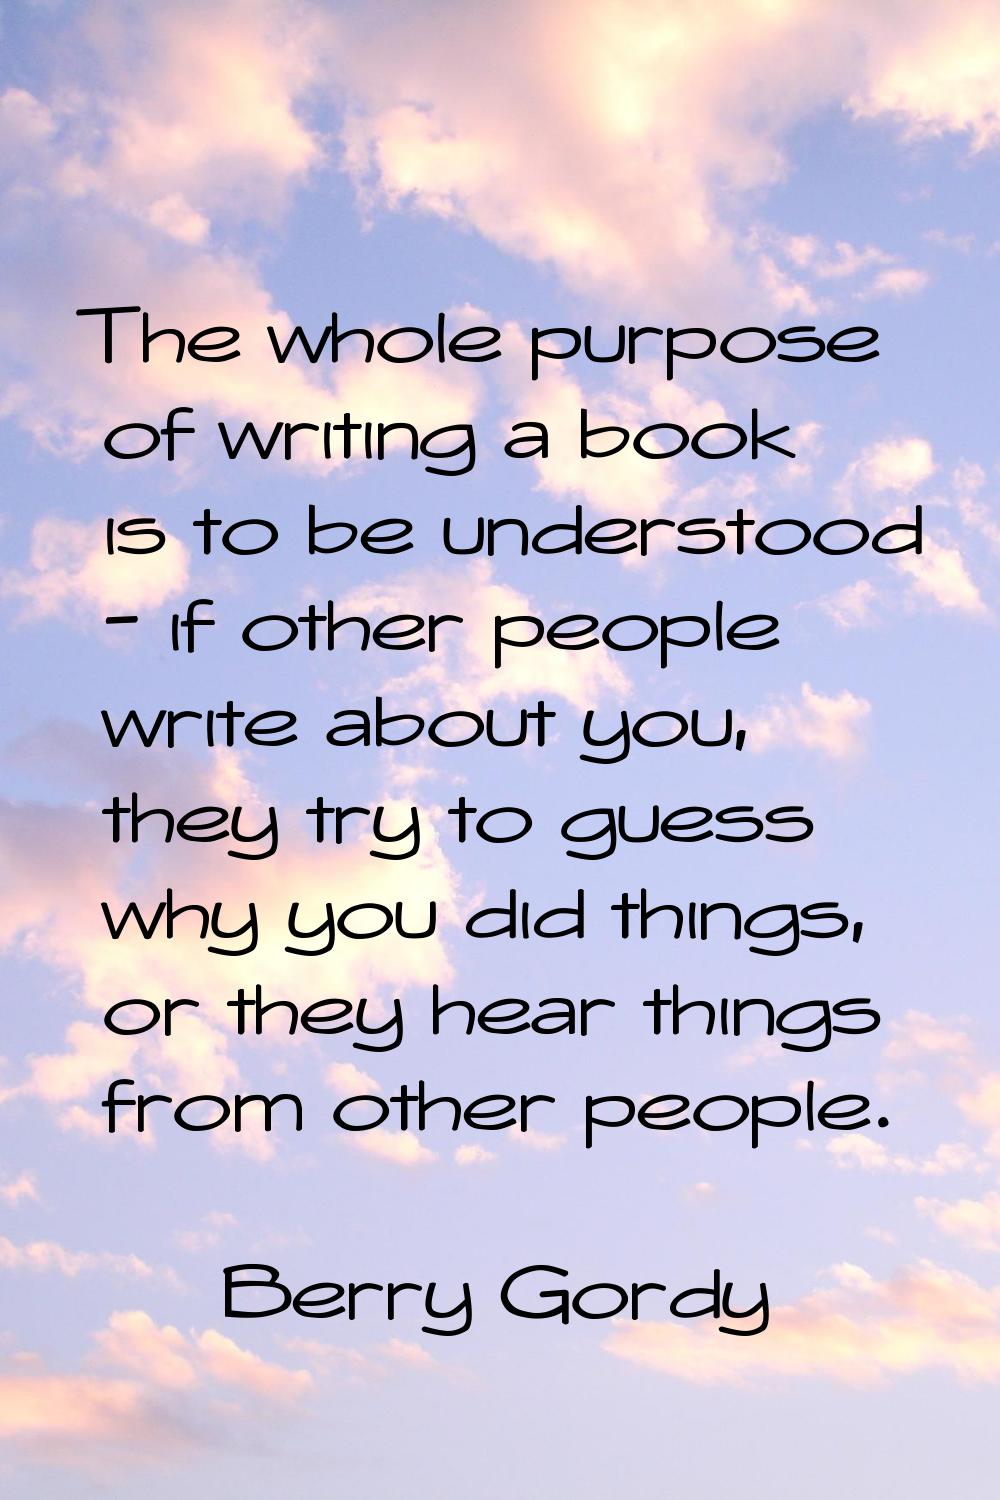 The whole purpose of writing a book is to be understood - if other people write about you, they try